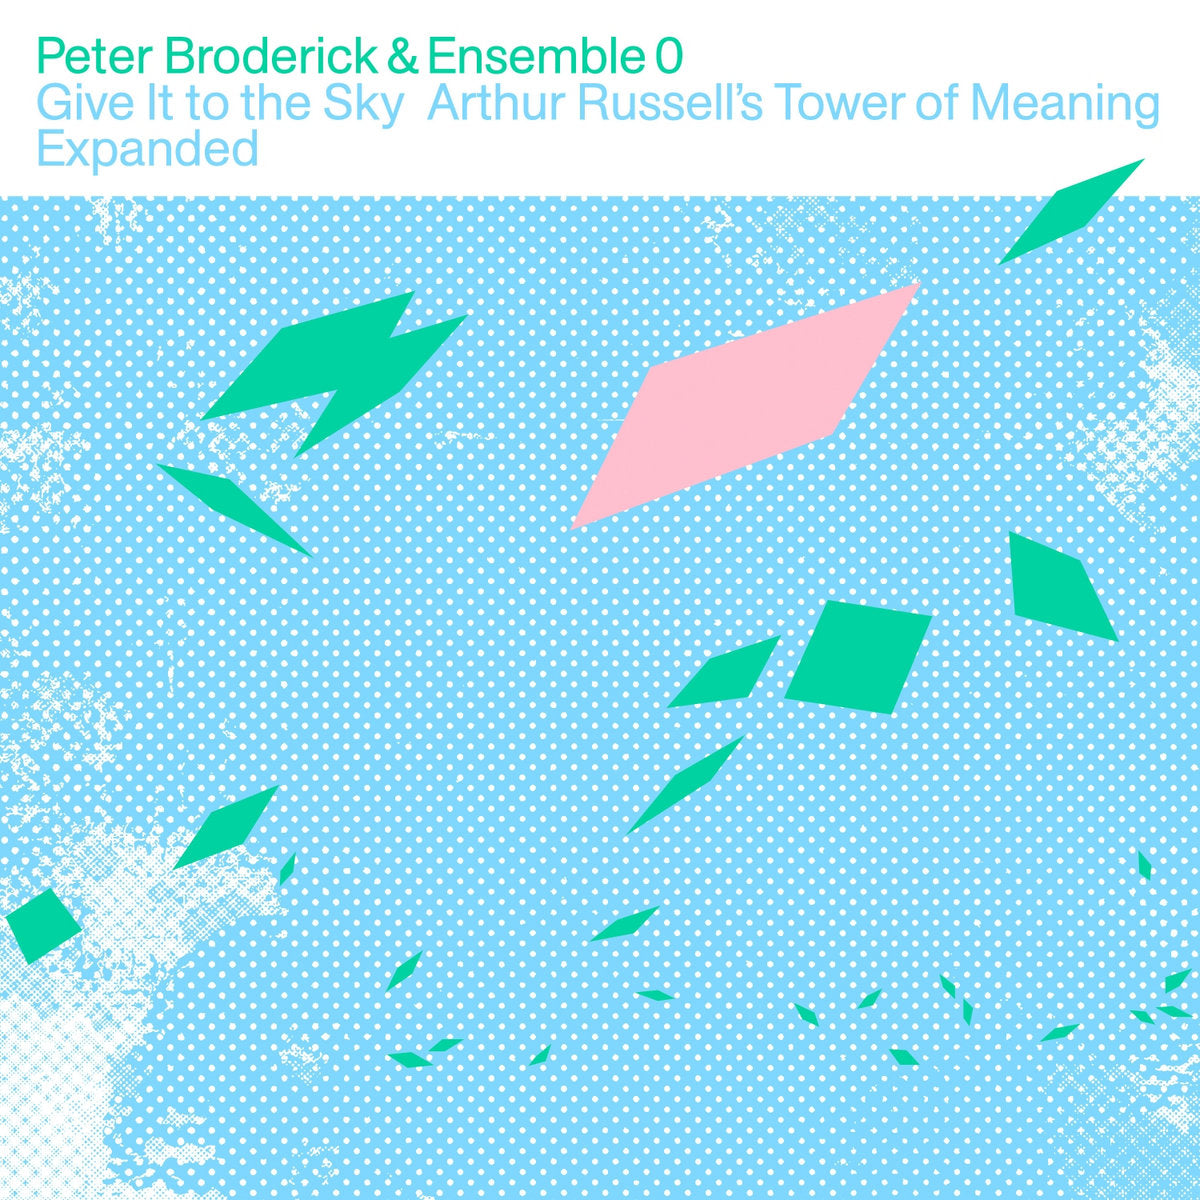 PETER BRODERICK & ENSEMBLE 0 - Give It To The Sky: Arthur Russell's Tower Of Meaning Expanded - 2LP - Black Vinyl